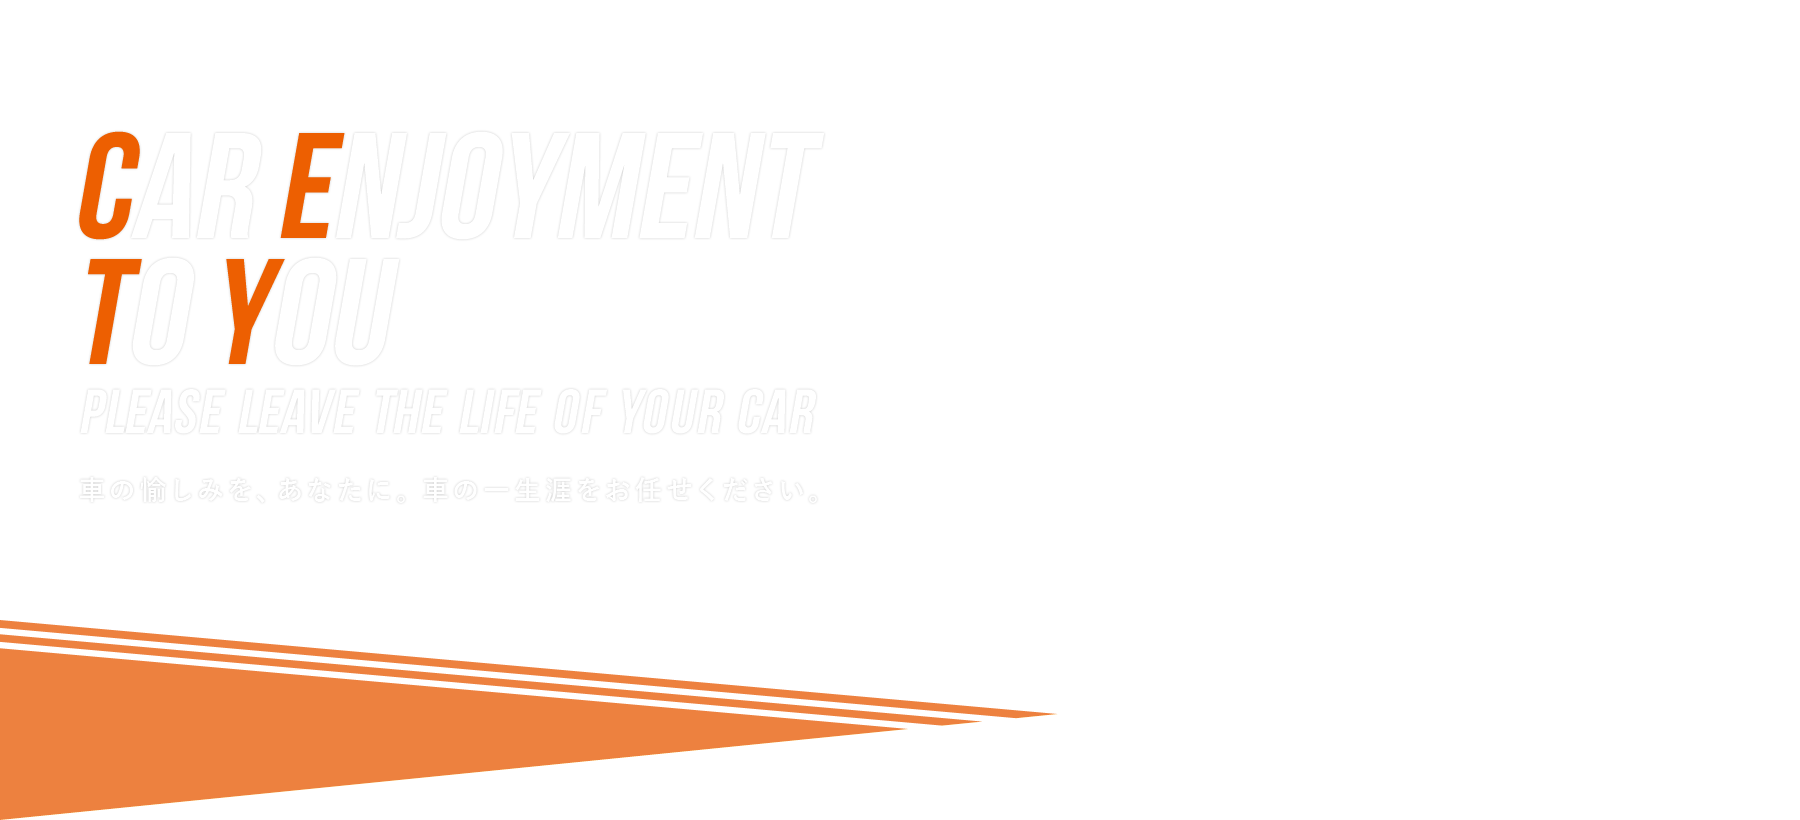 CAR ENJOYMENT TO YOU Please leave the life of your car 車の愉しみを、あなたに。 車の一生涯をお任せください。